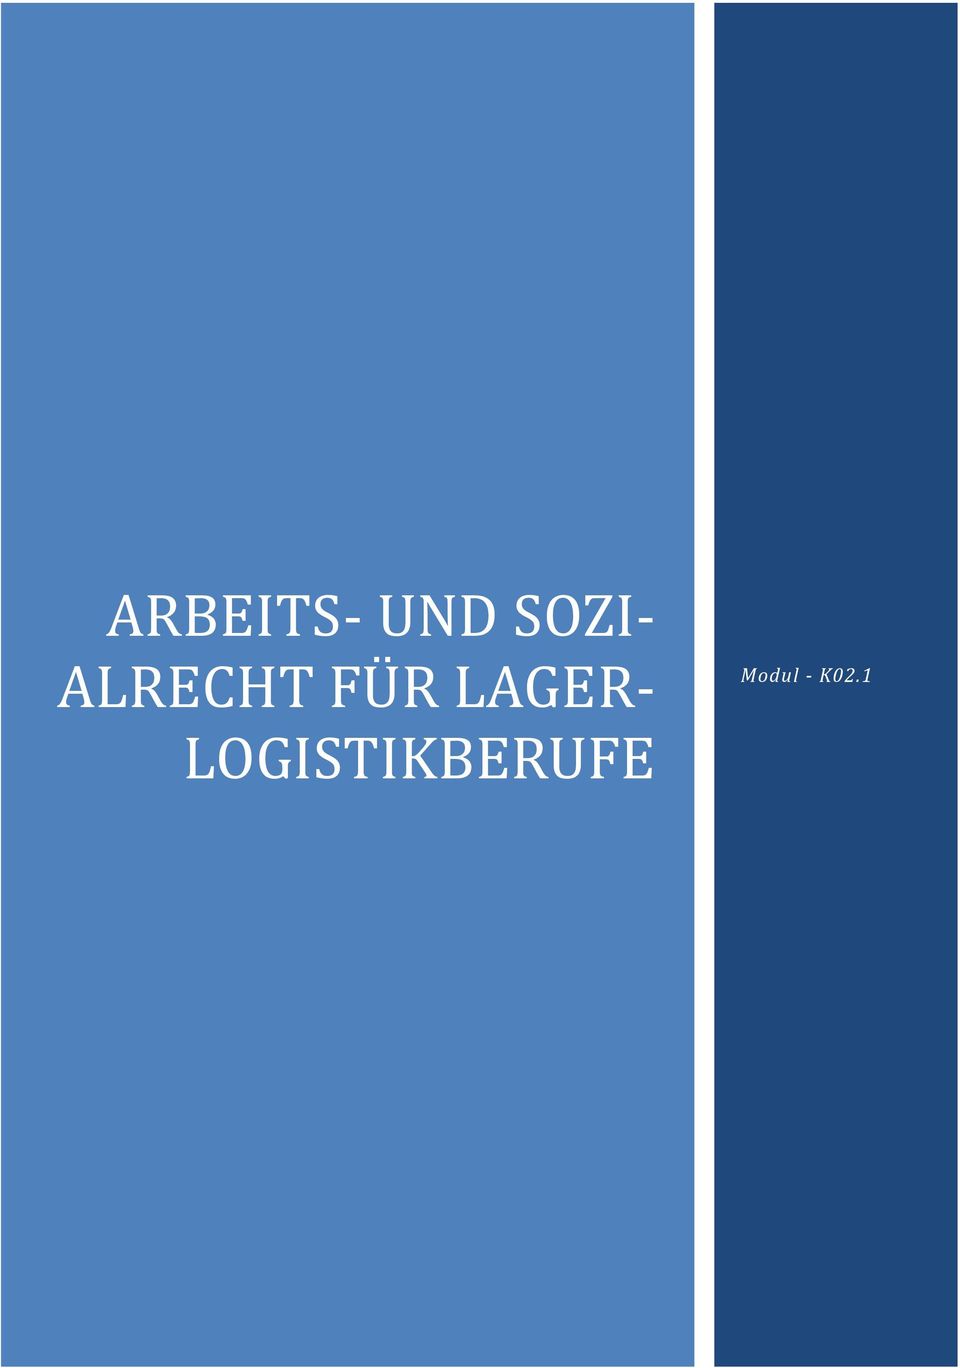 R LAGER-